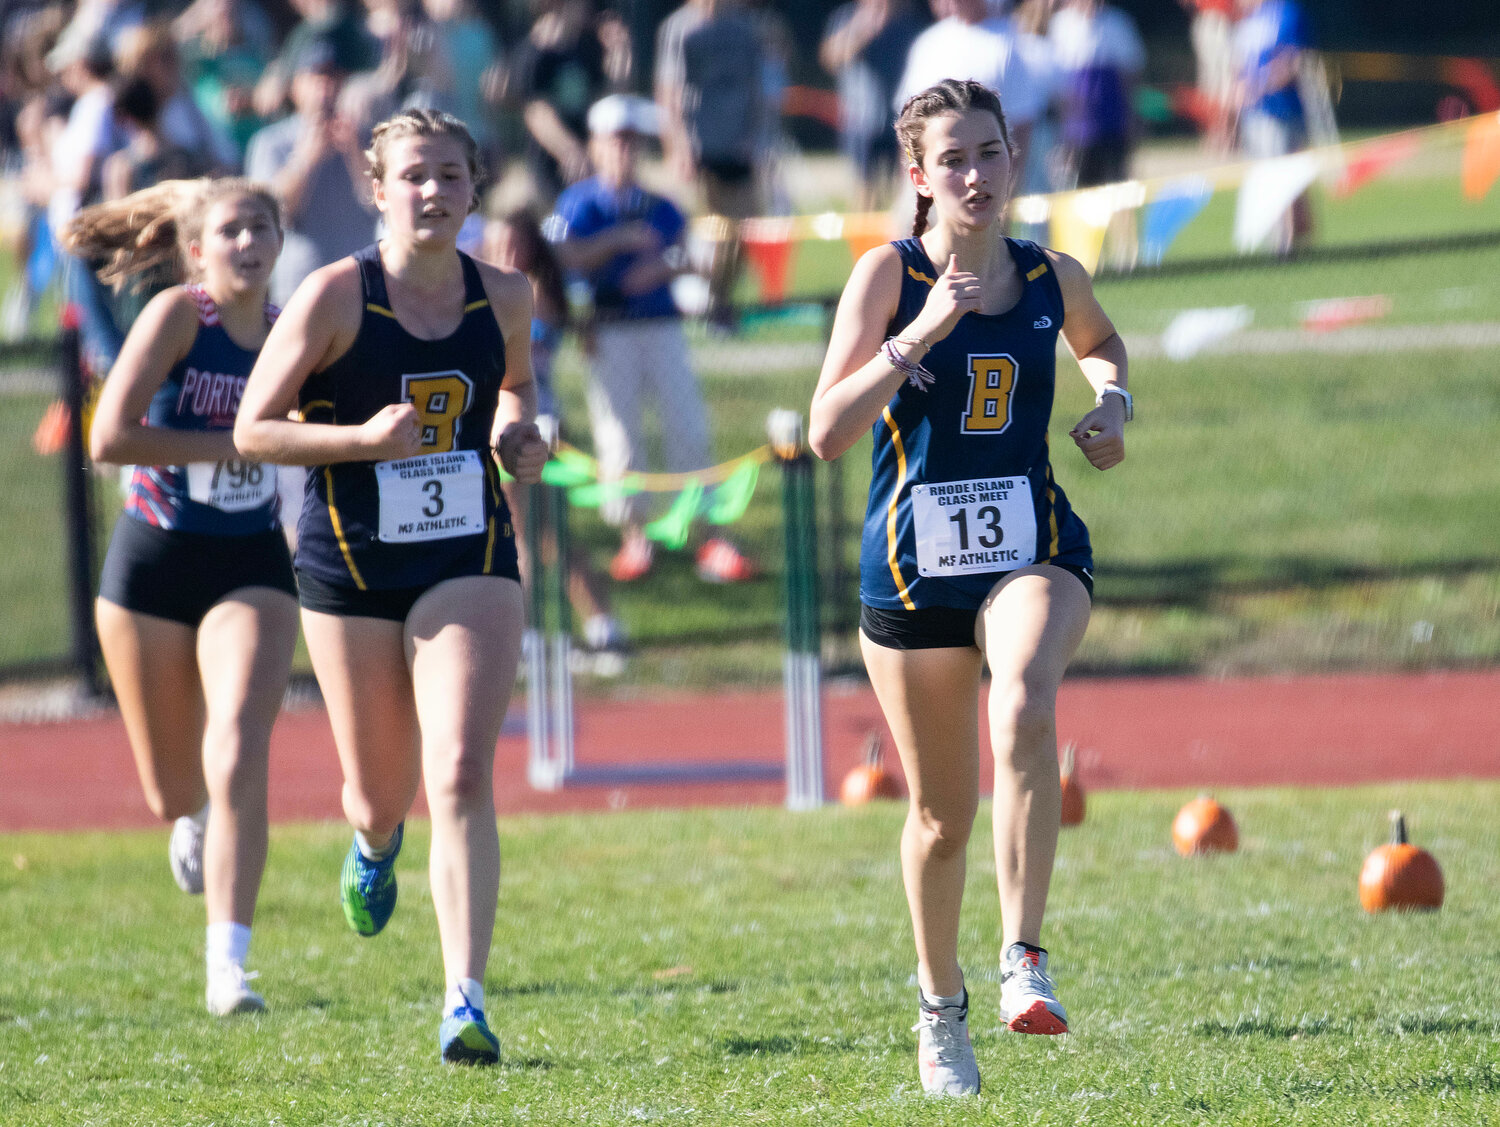 Barrington’s Jane Bryant (left) and Sophie Gardos race toward the finish line in the Class B Championship at Ponaganset High School on Saturday.